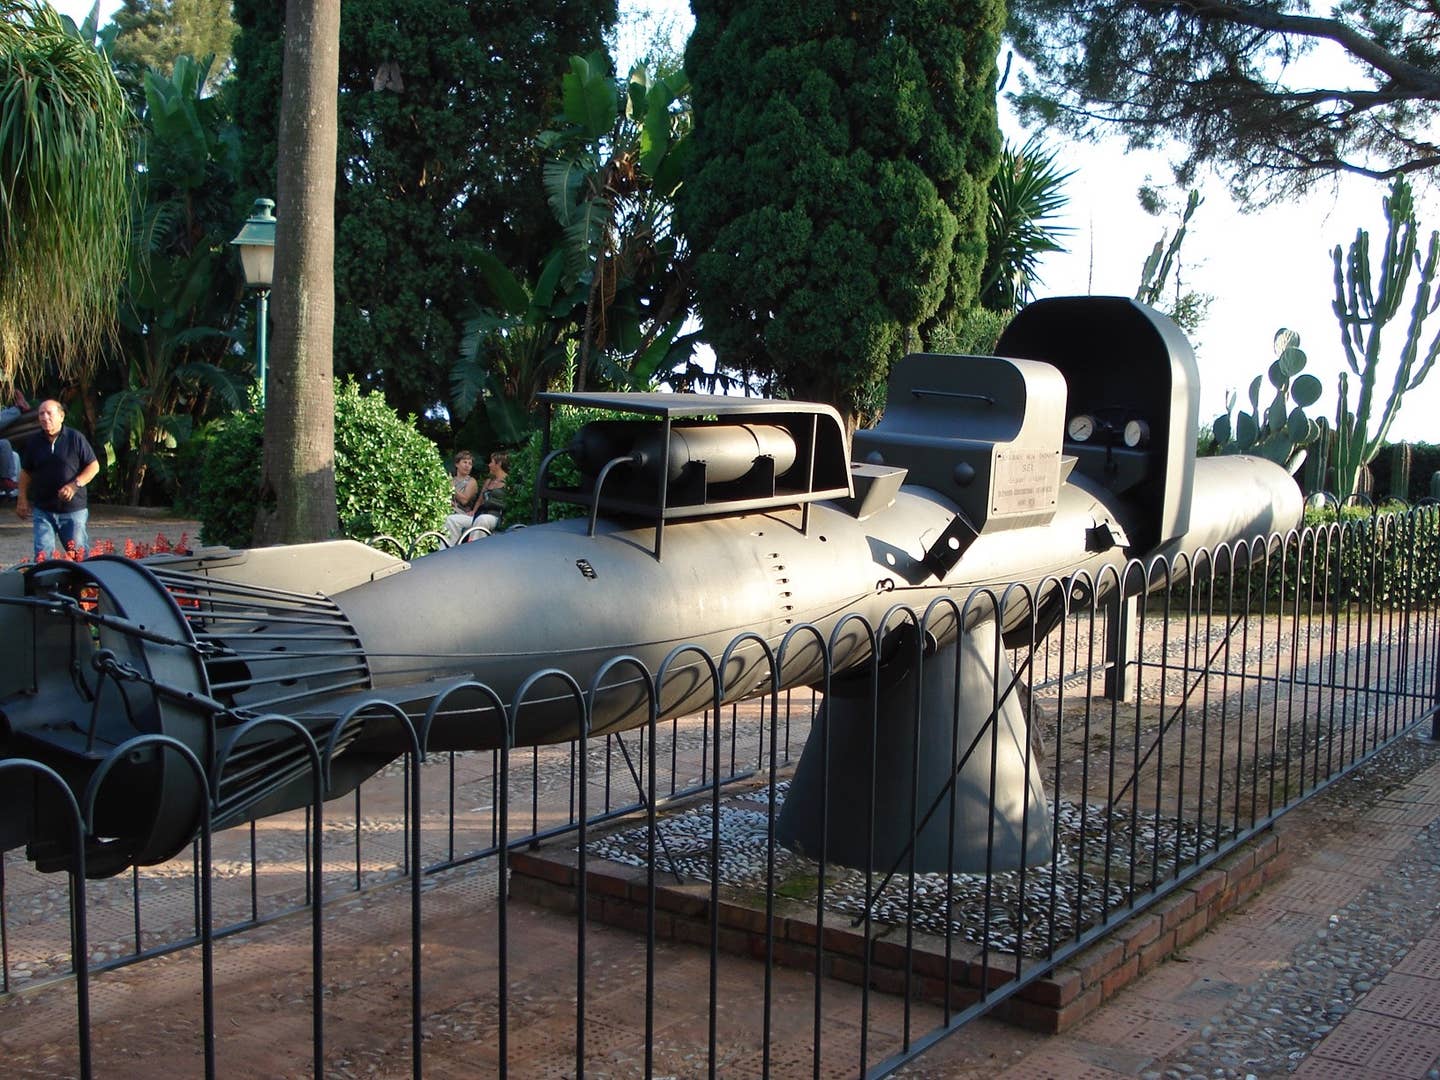 A "maiale" on display in the&nbsp;Public gardens&nbsp;in&nbsp;Taormina, Italy. <em>Giovanni Dall'Orto via Wikimedia Commons</em>